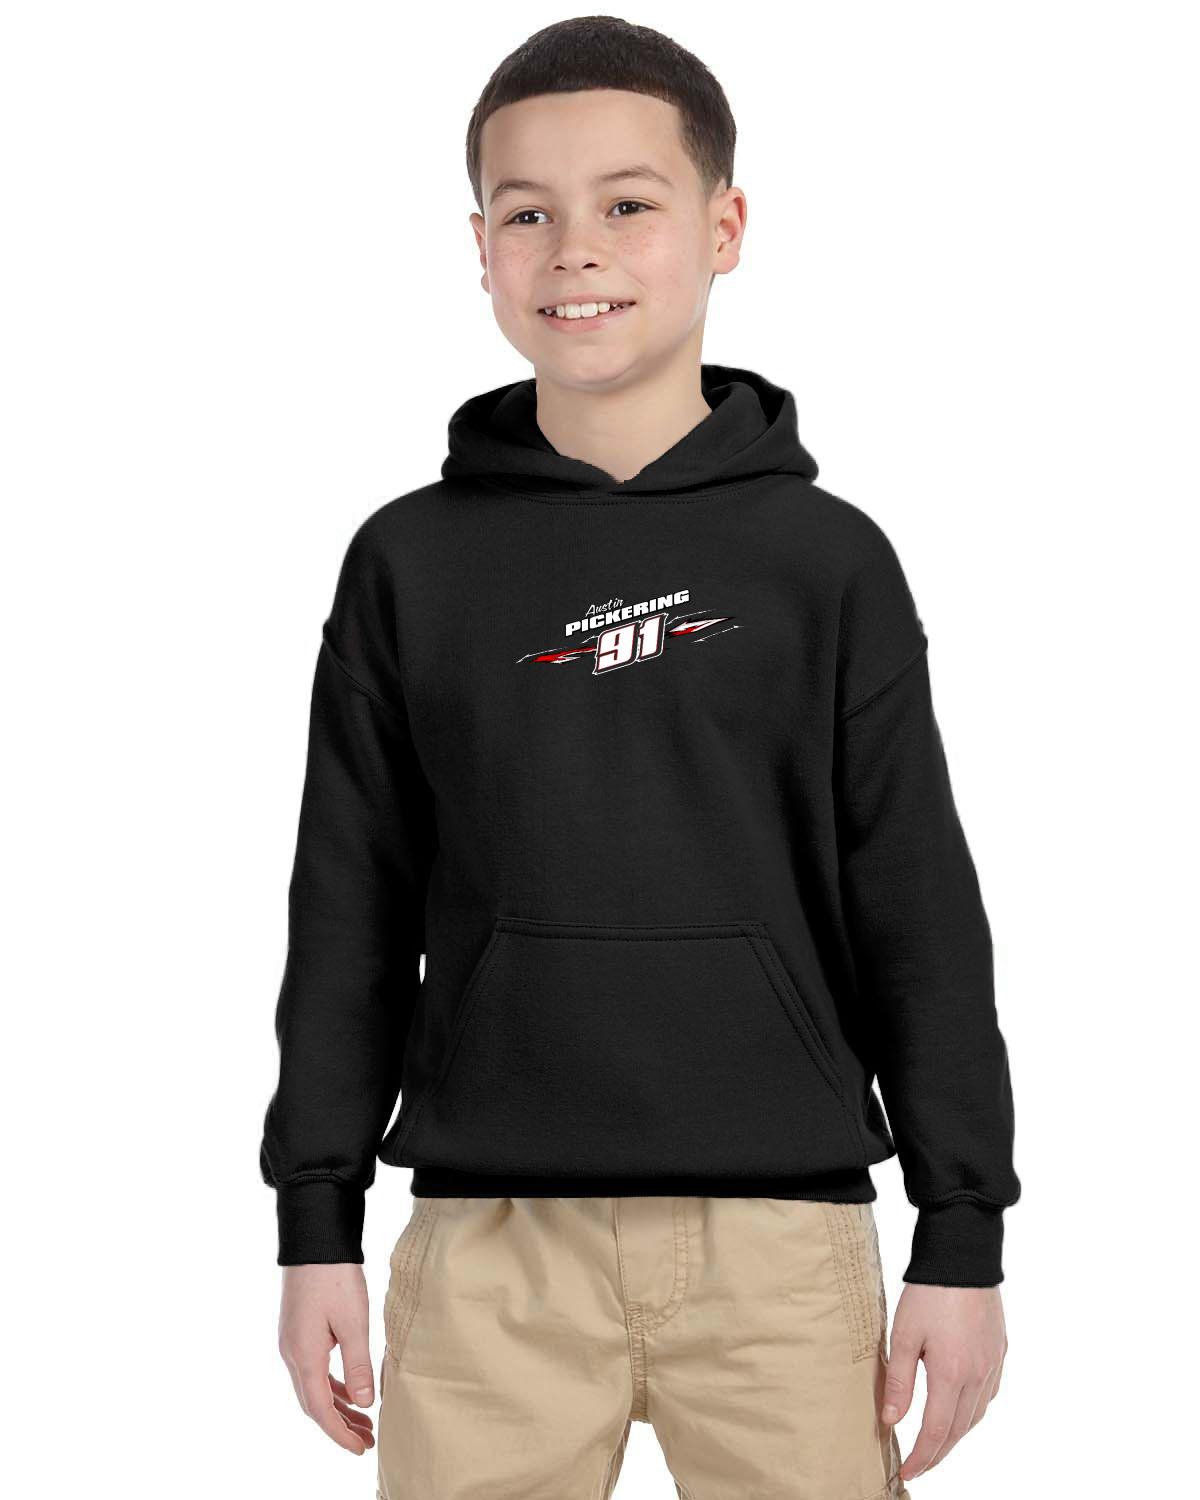 Austin Pickering Double sided Youth Hoodie